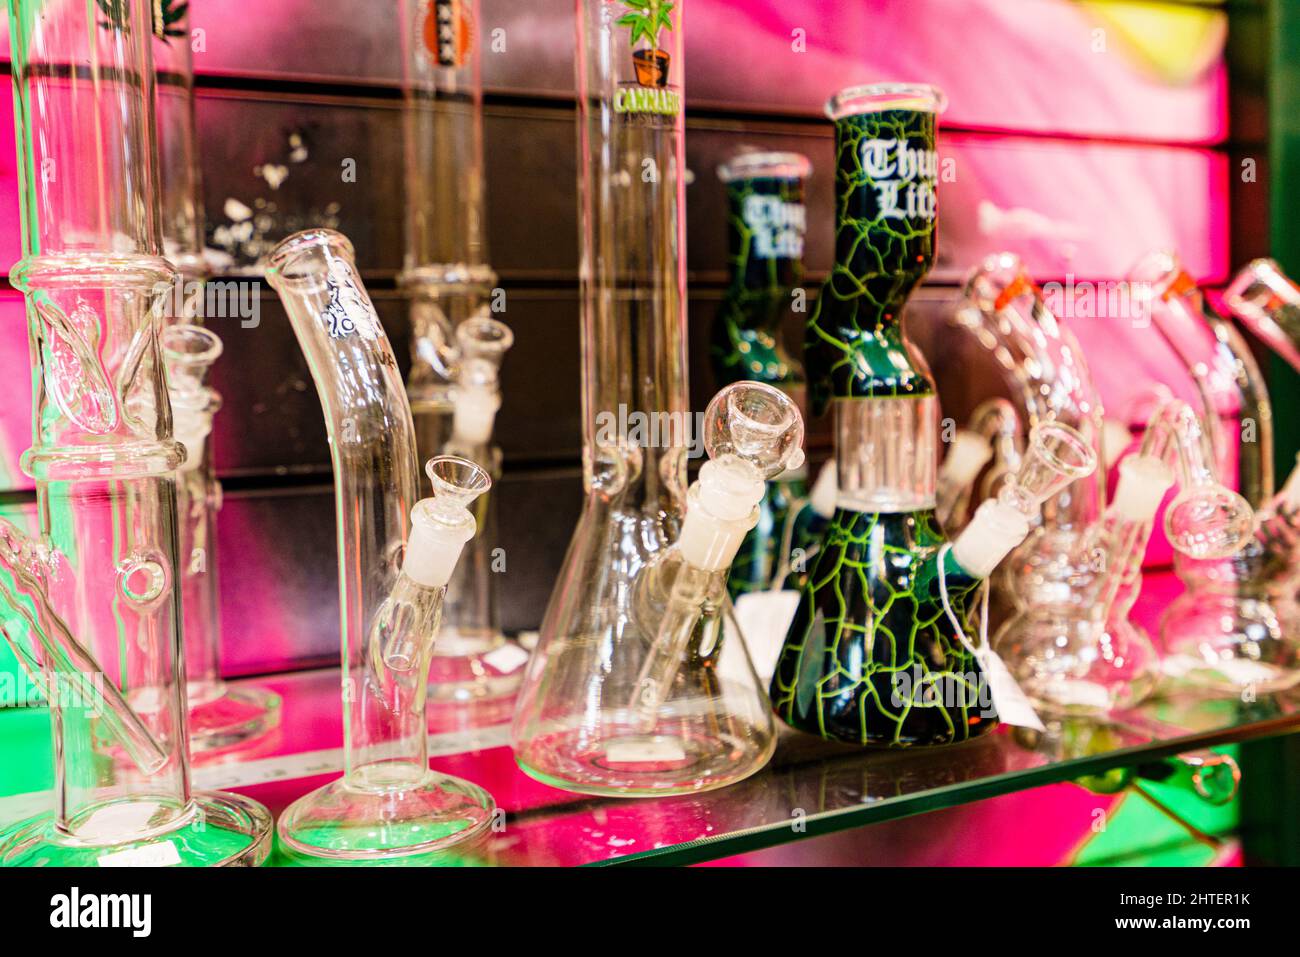 Amsterdam, Netherlands - 16 November, 2021: Cannabis smoking equipment for sale in shop. Recreational use of cannabis is allowed in some countries but Stock Photo